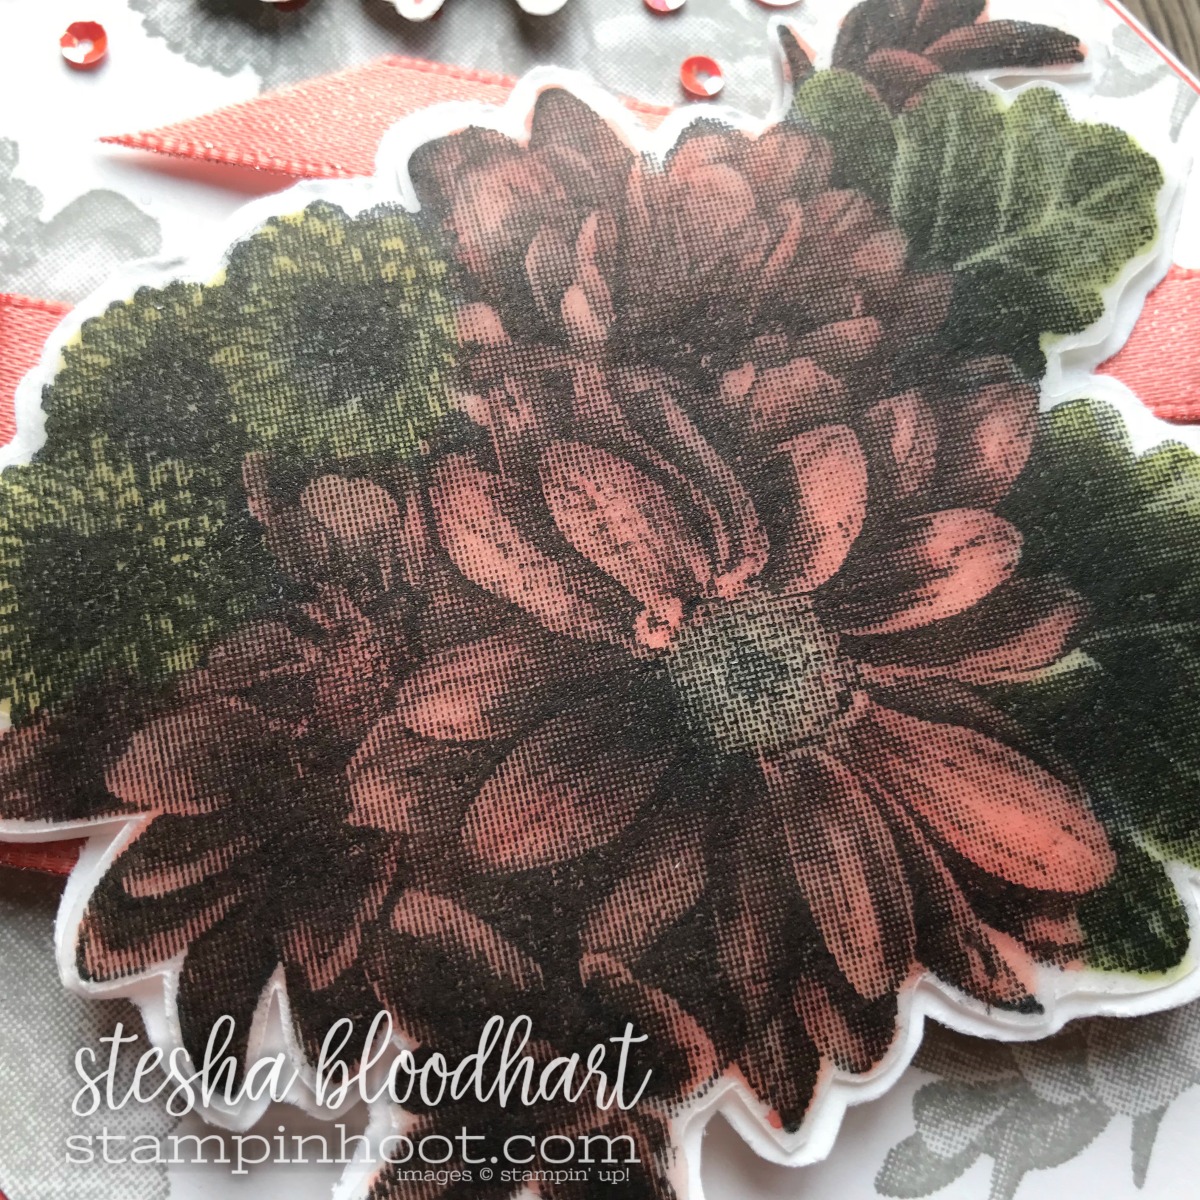 Heartfelt Blooms 2018 Sale-a-Bration Set Earned Free with $50 Purchase, Buy Online at Stampin' Hoot! Stesha Bloodhart #stampinhoot #steshabloodhart